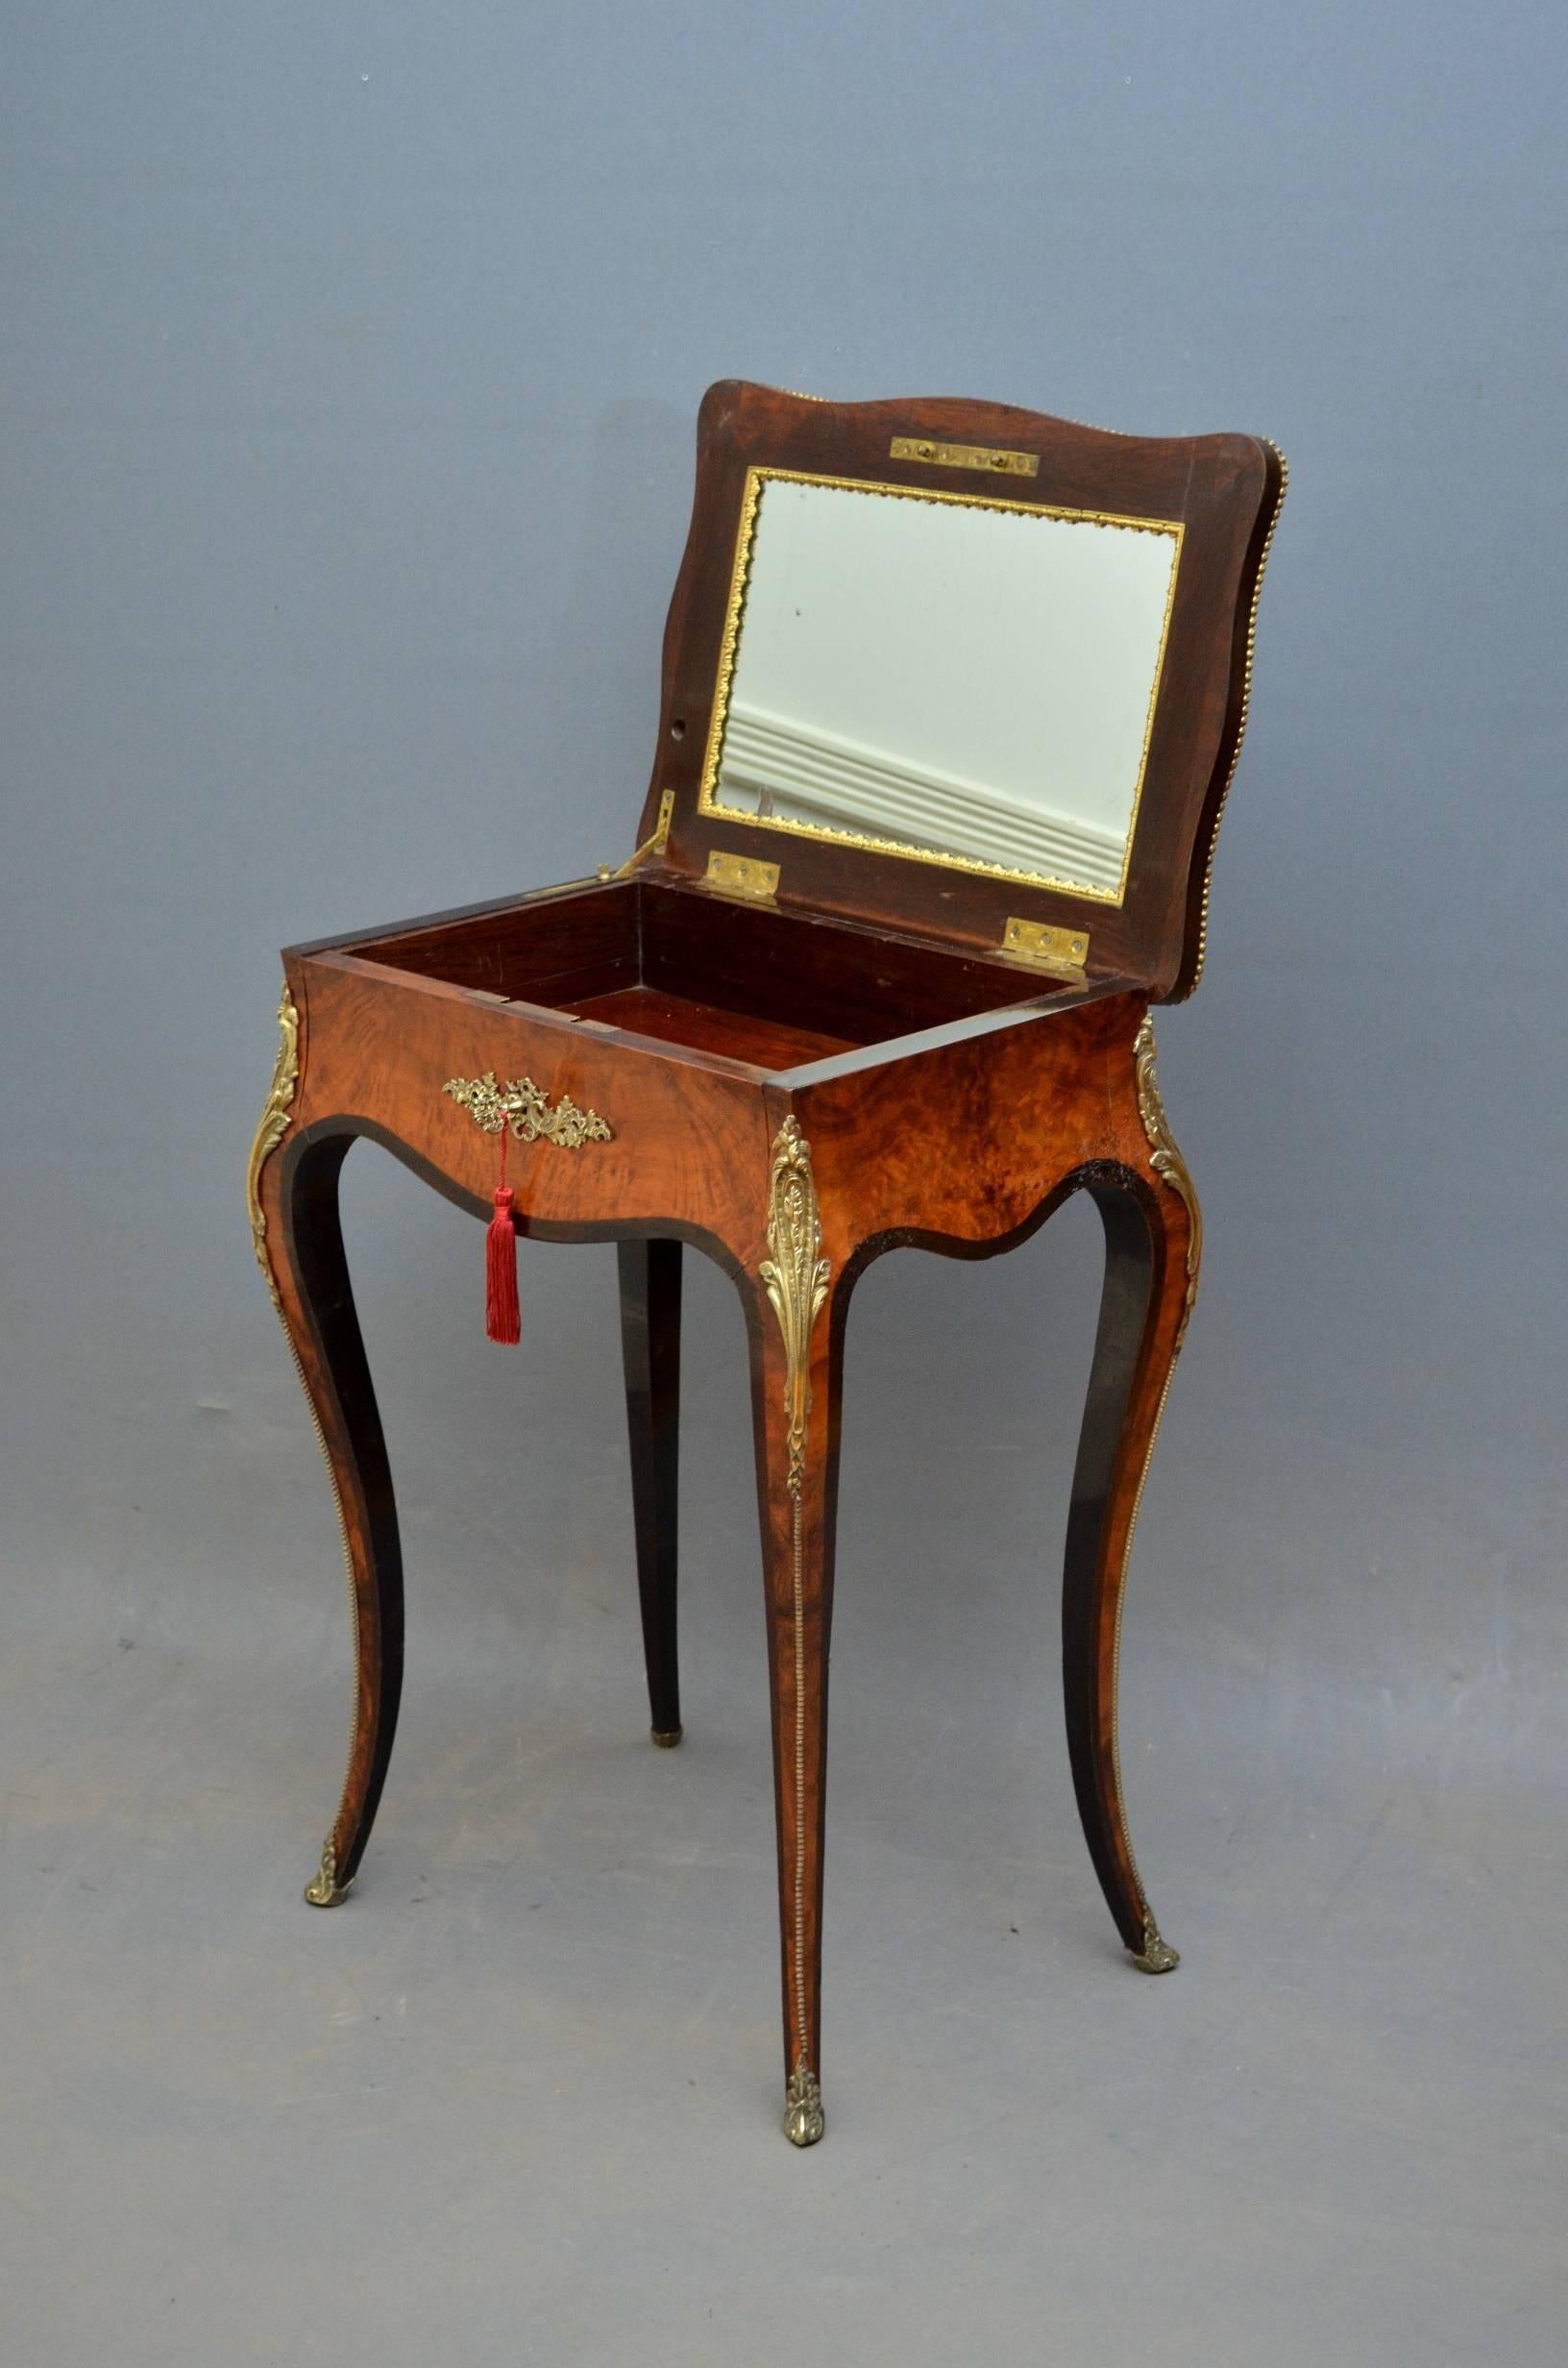 Sn3642, exceptional French dressing table or occasional table, having serpentine top with kingwood and ebony banding and brass decorated edge, which opens to reveal original mirror and drawer with original working lock and key, all raised on elegant